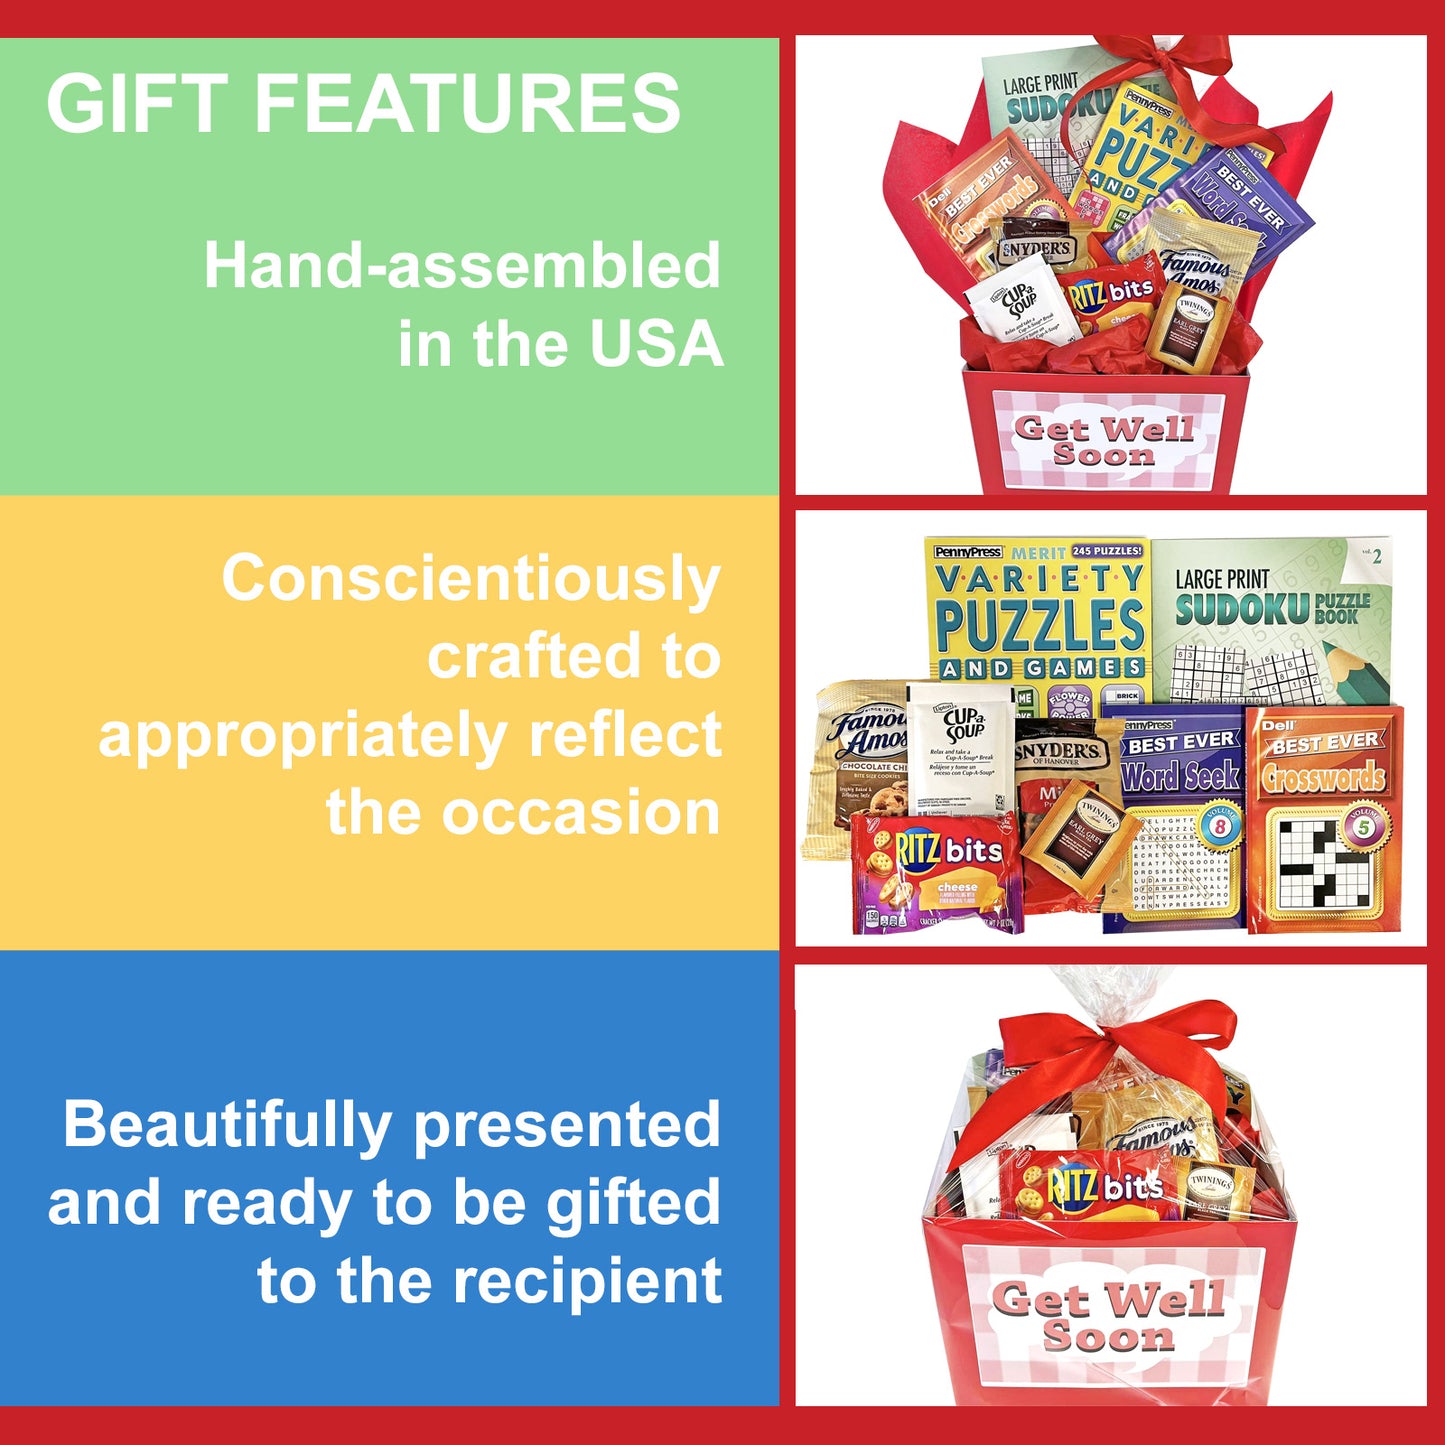 Comforting Gift Box for Get Well, Thinking of You, After Surgery, Recovery, Illness Gift Basket has Food and Boredom Busters for Men, Women, Friends and Family